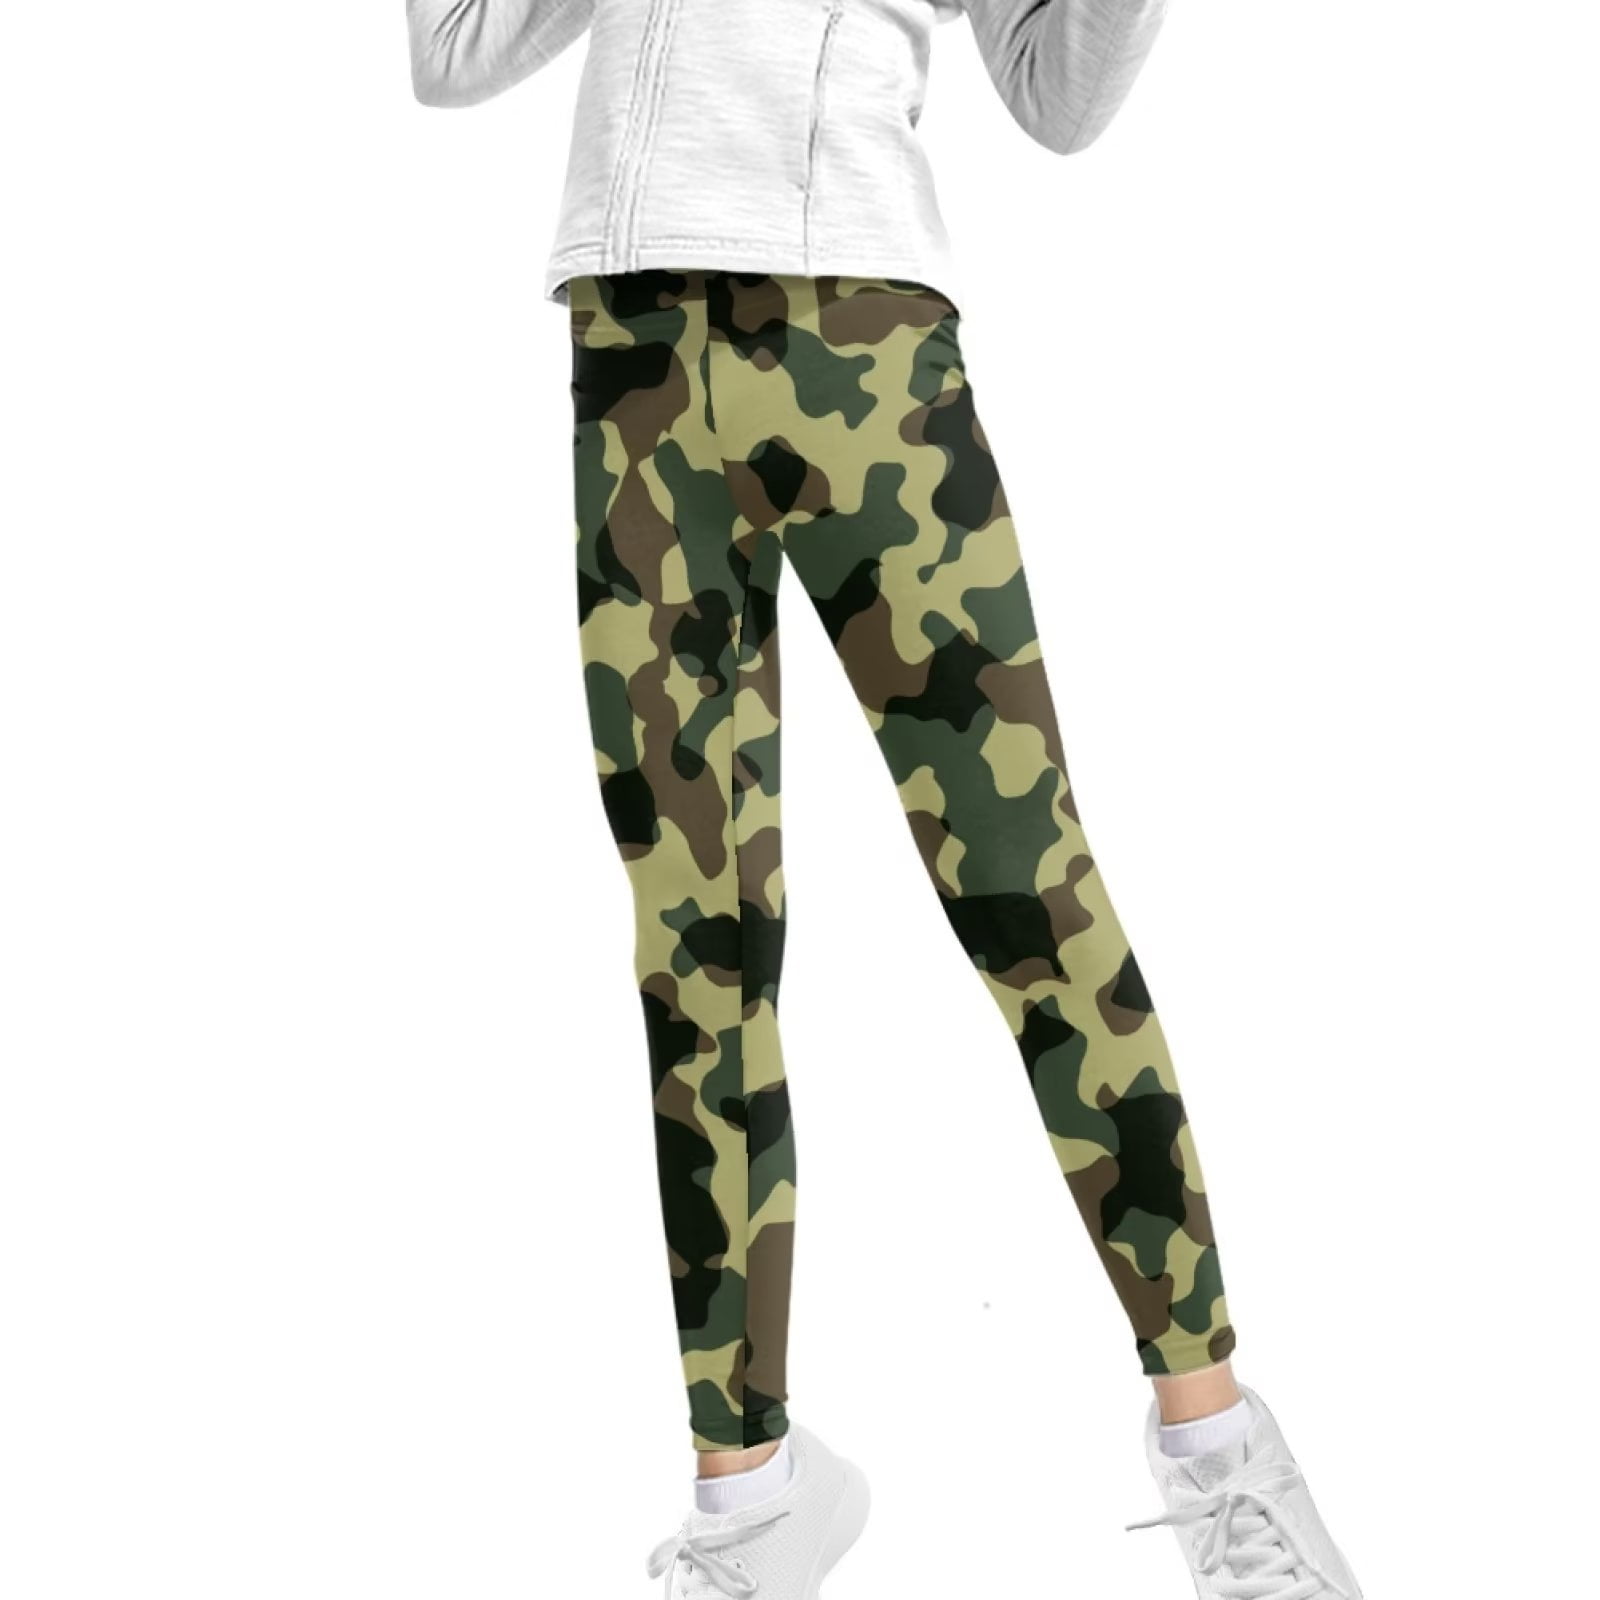 FKELYI Kids Leggings with Camo Hunting Army Size 6-7 Years